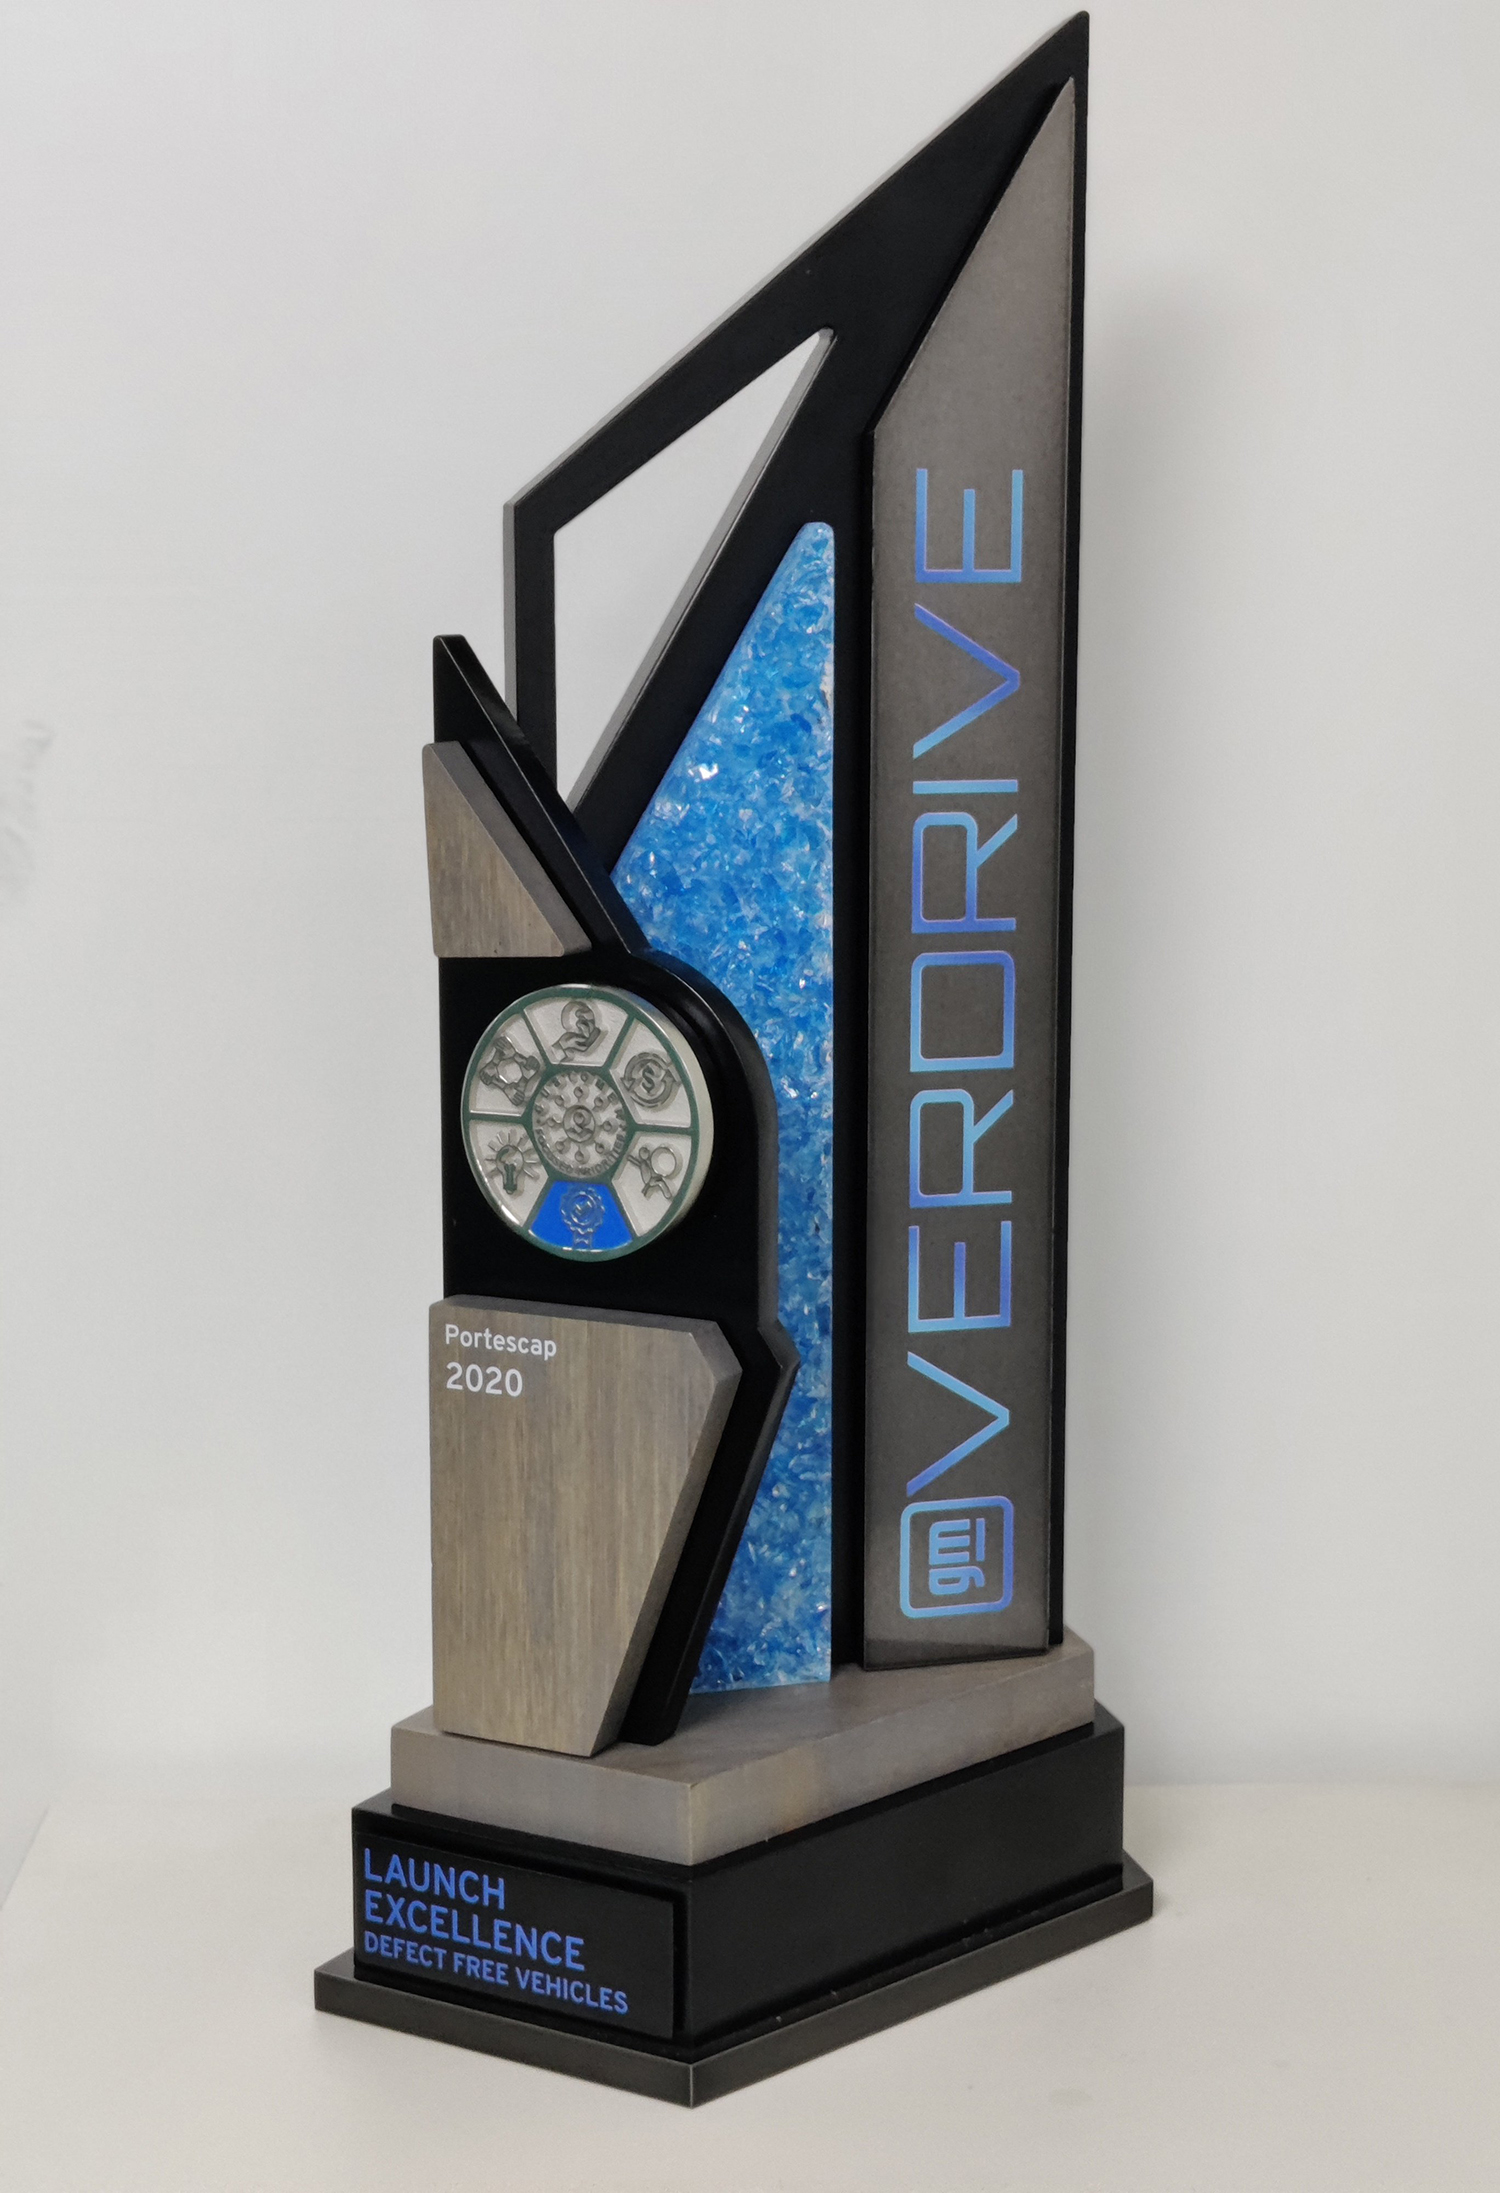 Portescap Recognized by General Motors as Winner of Coveted Overdrive Award